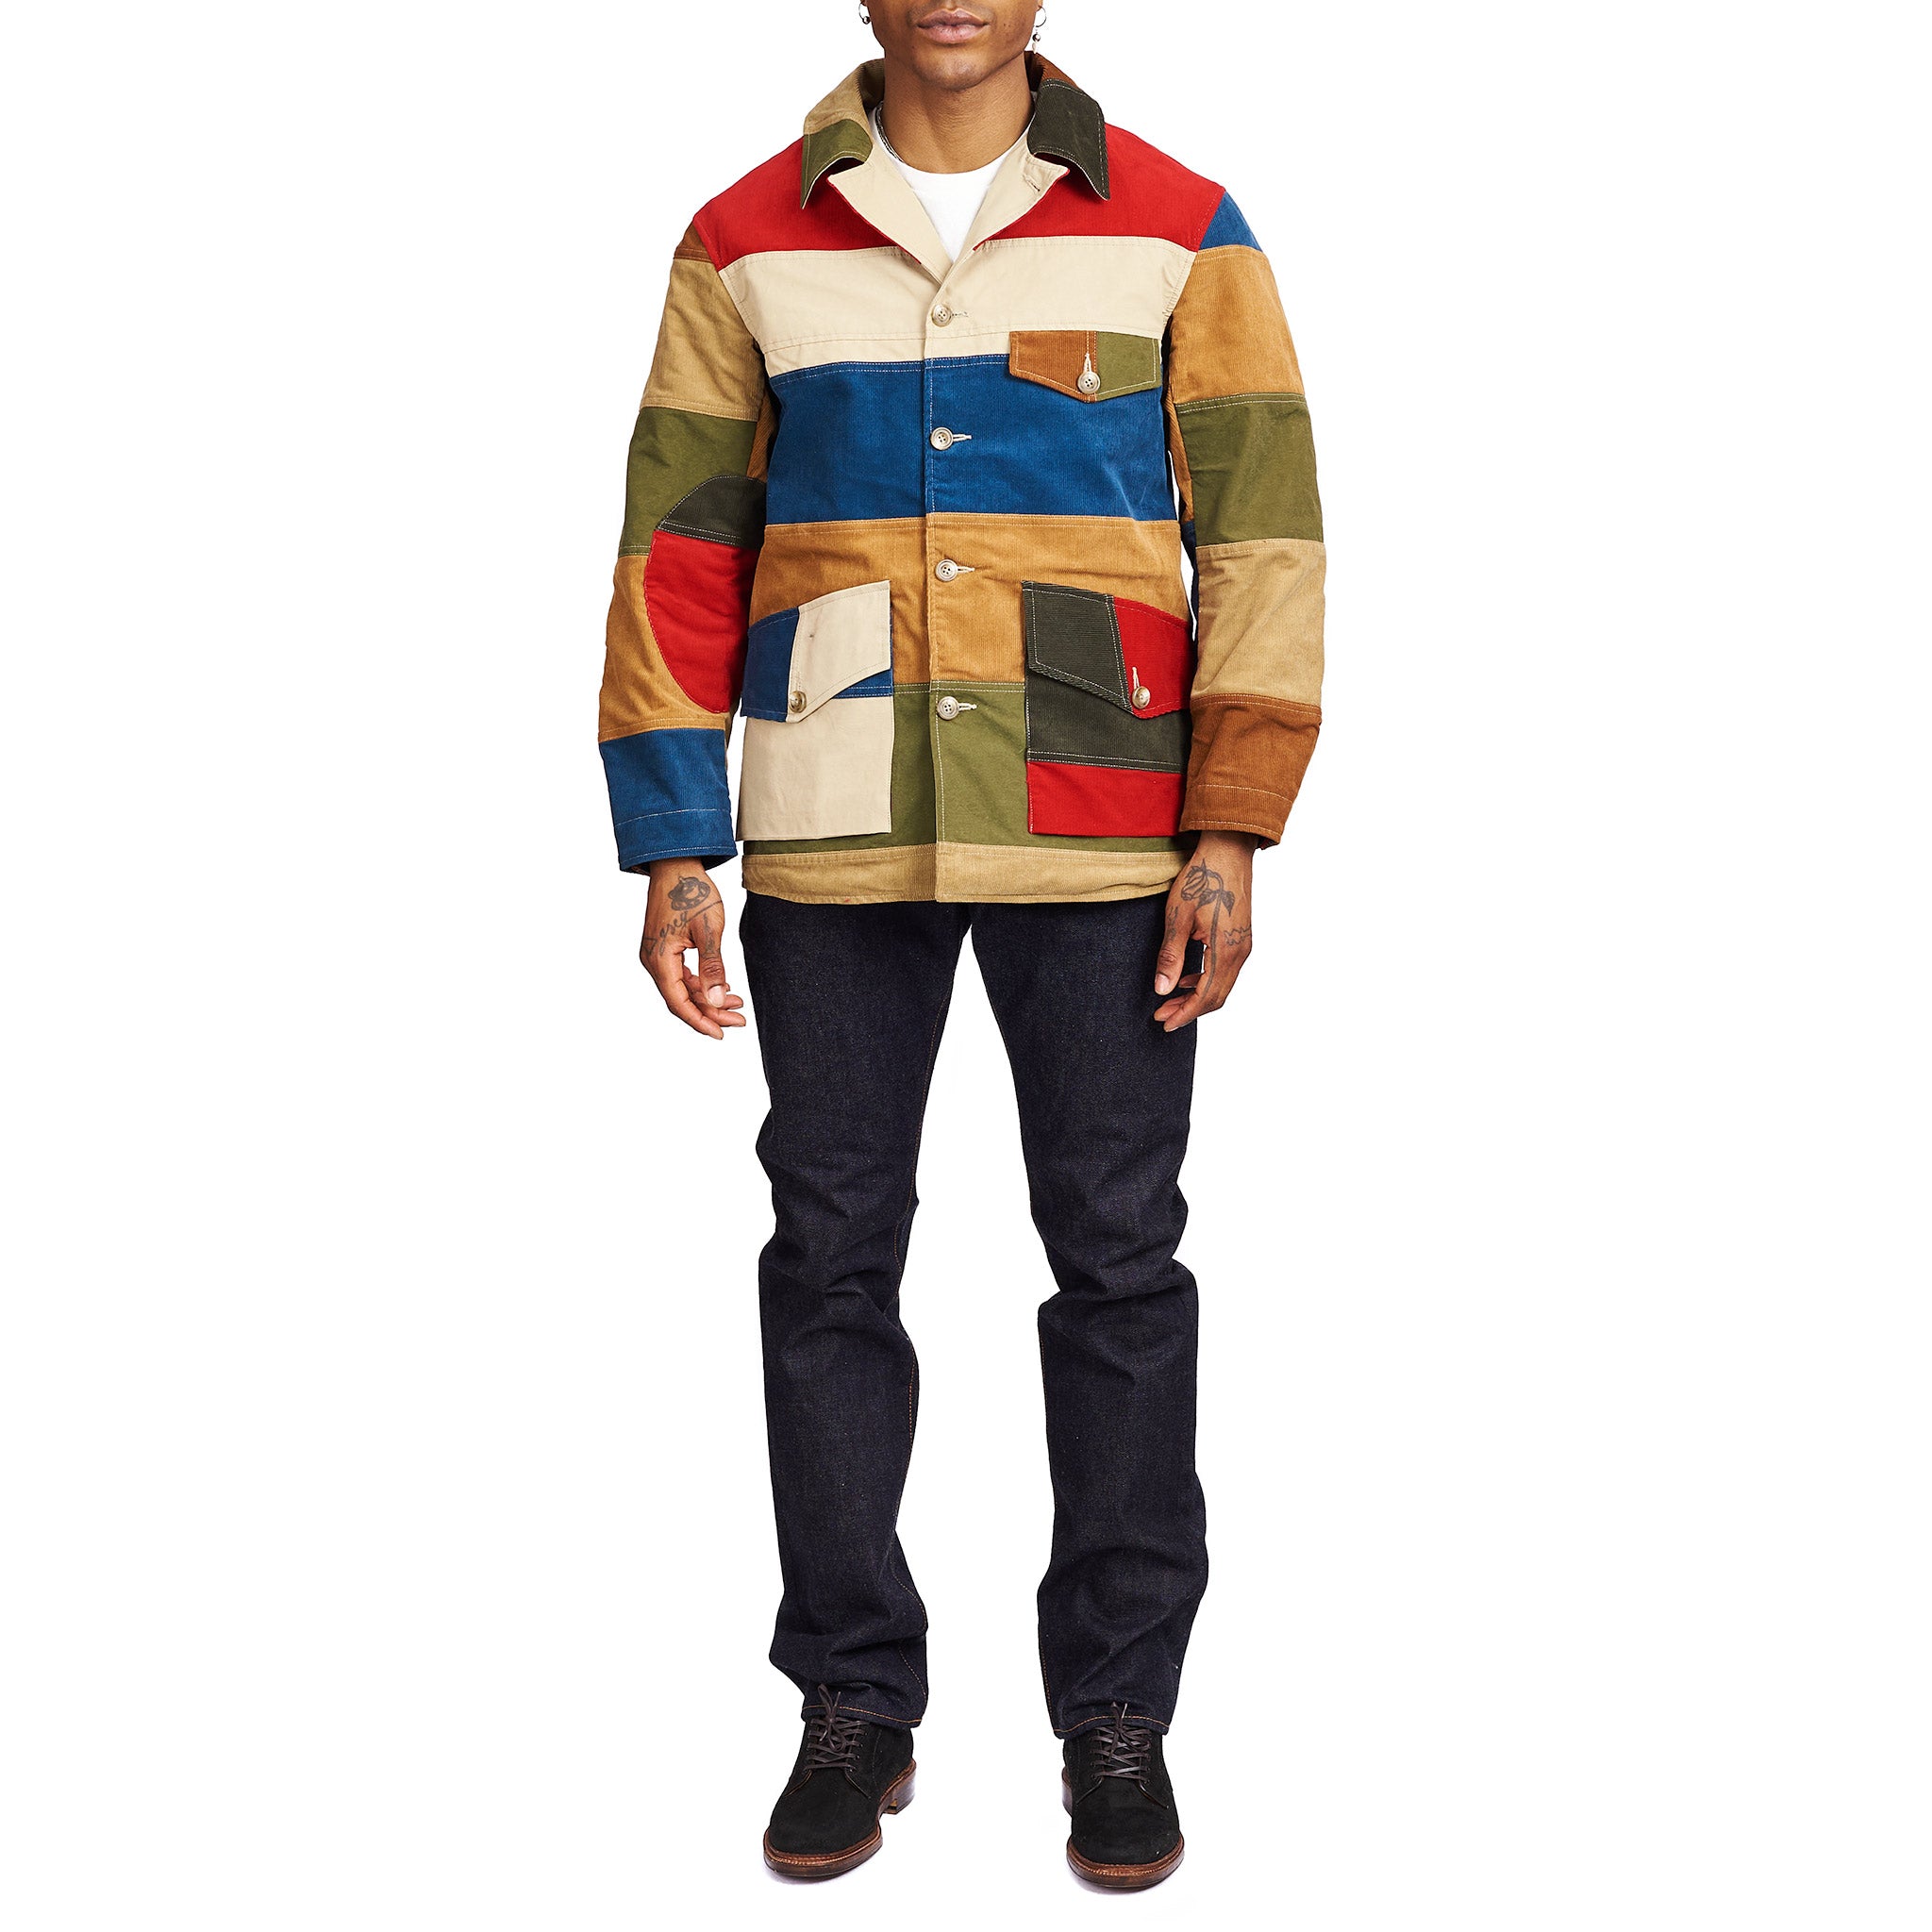 The Real McCoy's MJ21015 Multicolour Corduroy Hunting Coat Tricolour